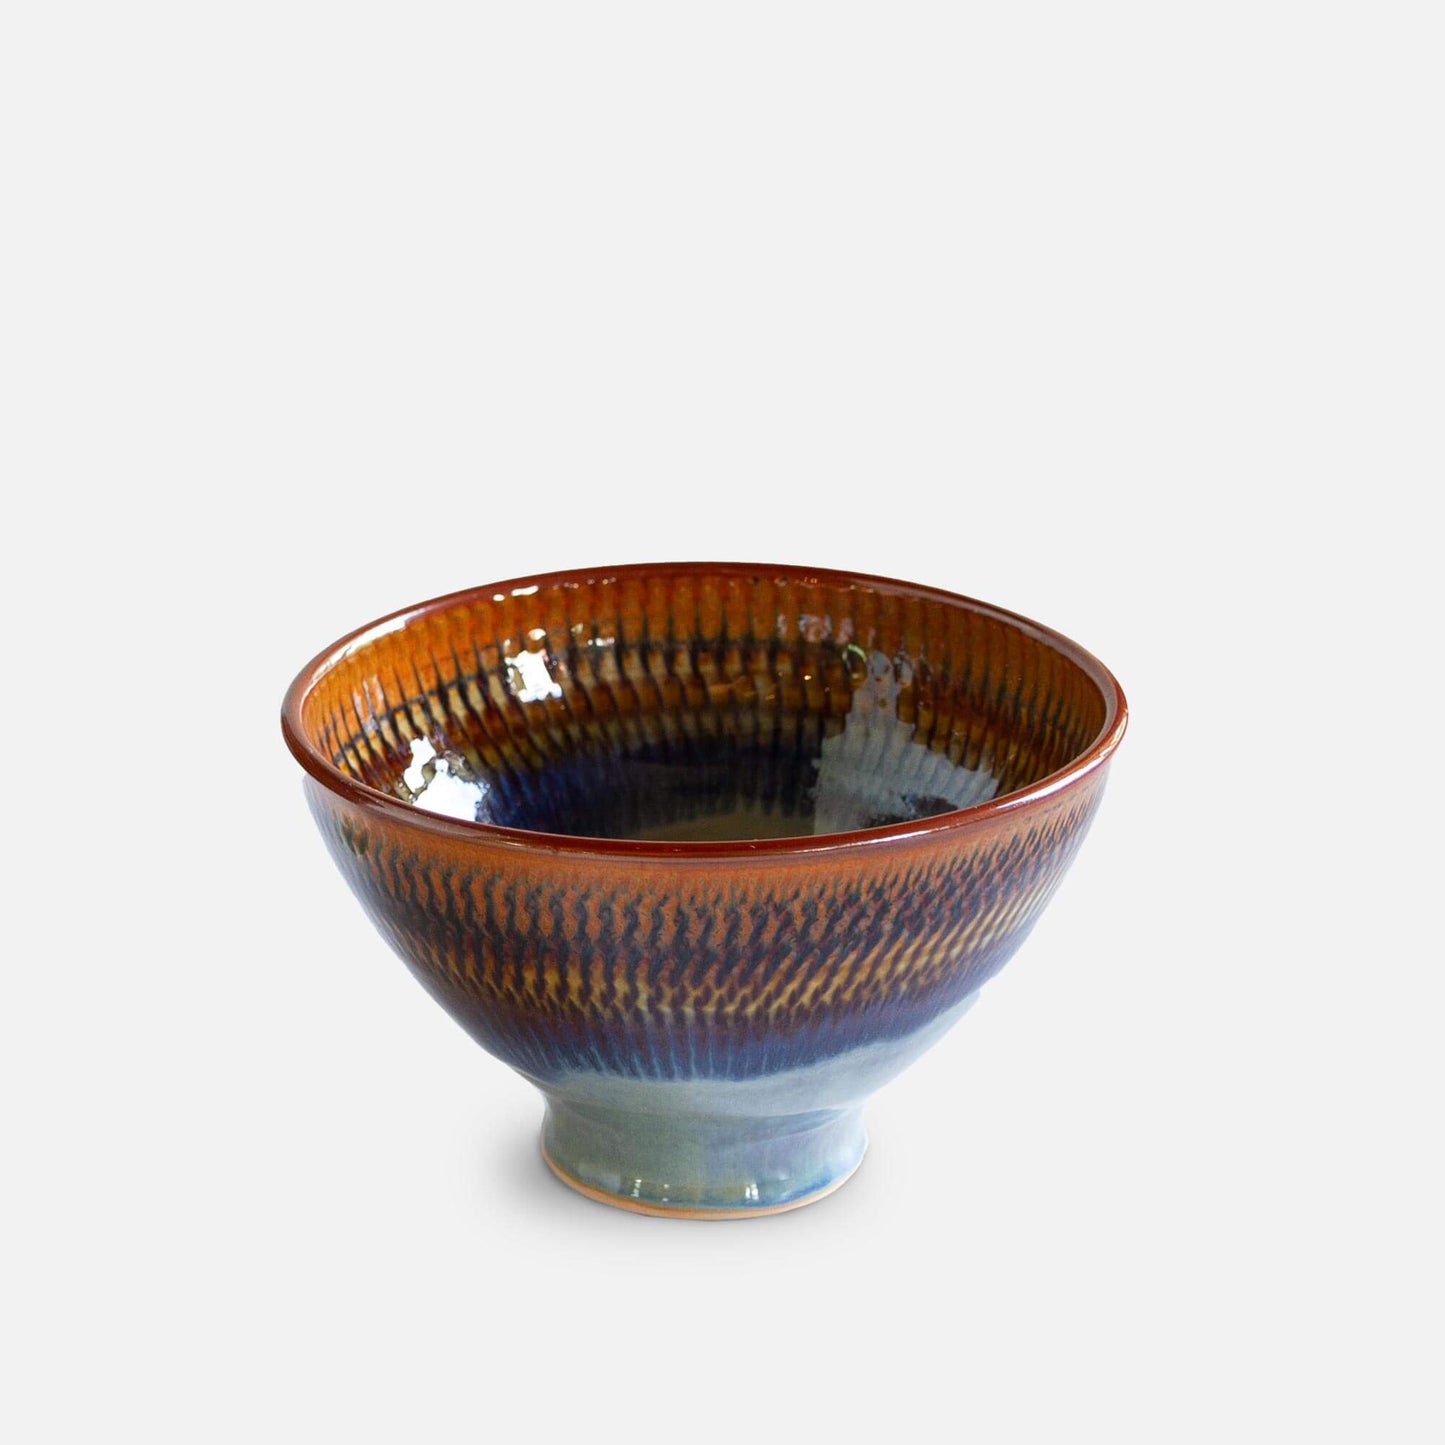 Handmade Pottery Noodle Bowl in Purple Hamada pattern made by Georgetown Pottery in Maine